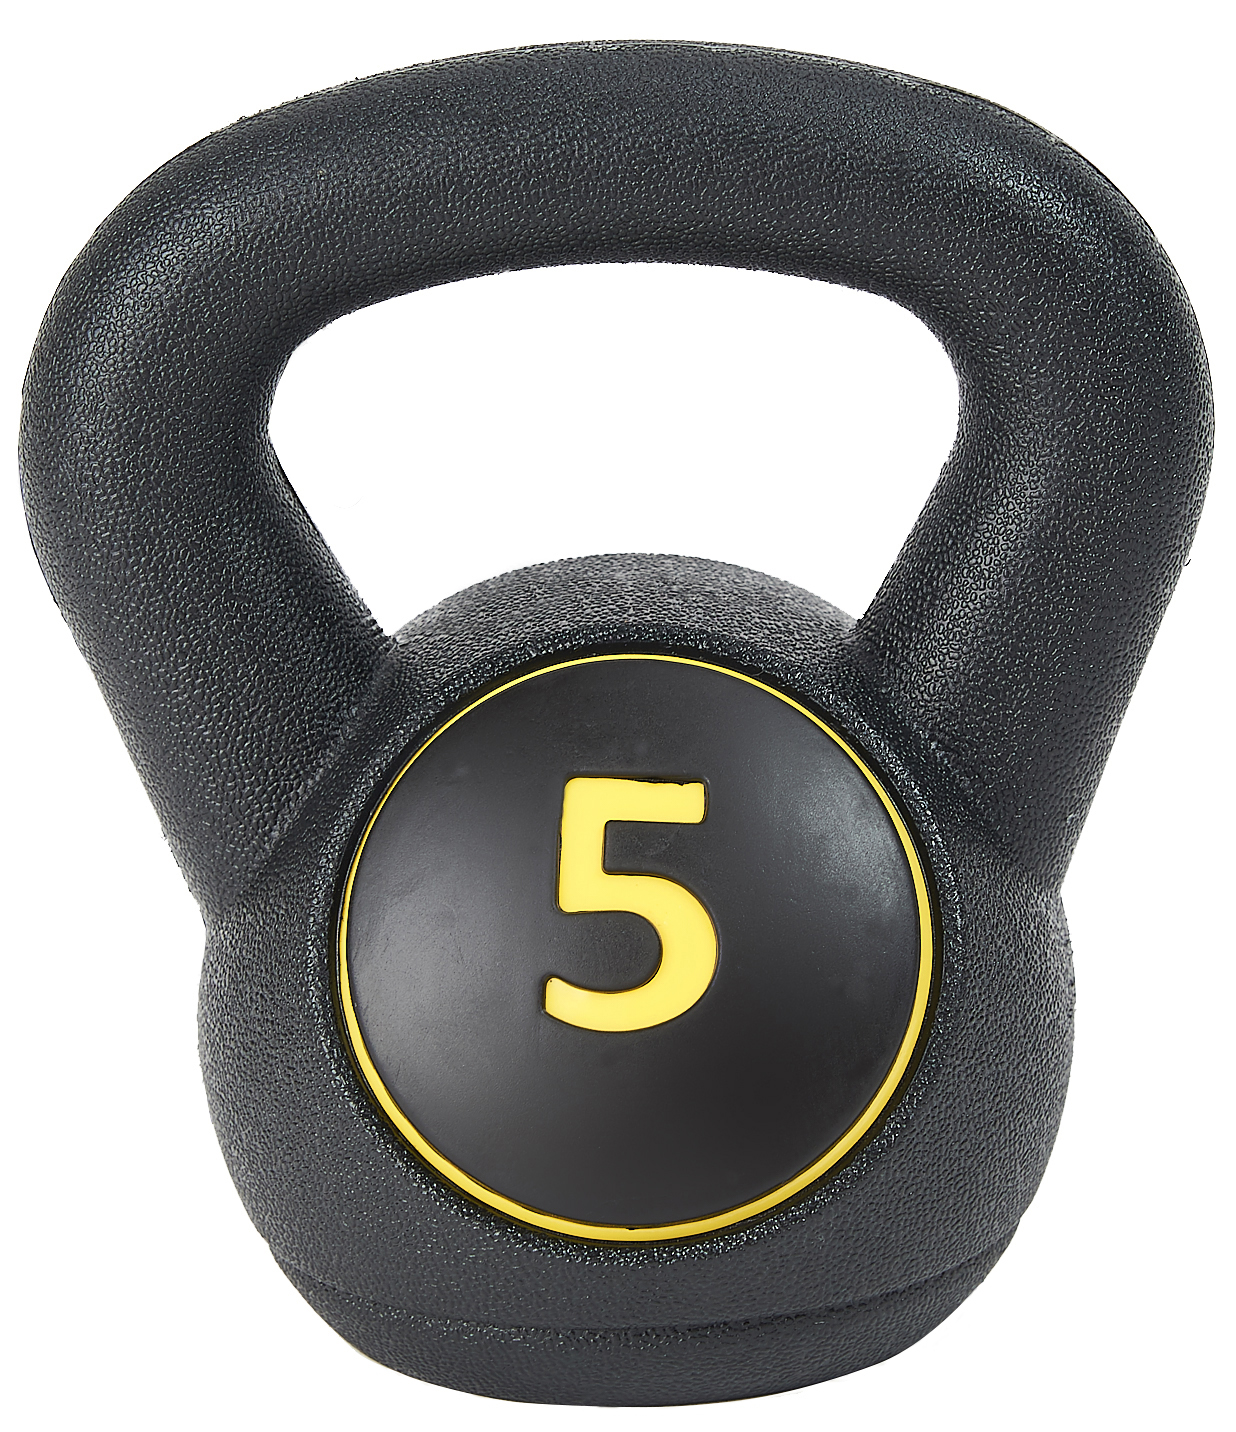 BalanceFrom Wide Grip 3-Piece Kettlebell Exercise Fitness Weight Set, Include 5 lbs, 10 lbs, 15 lbs - image 4 of 6